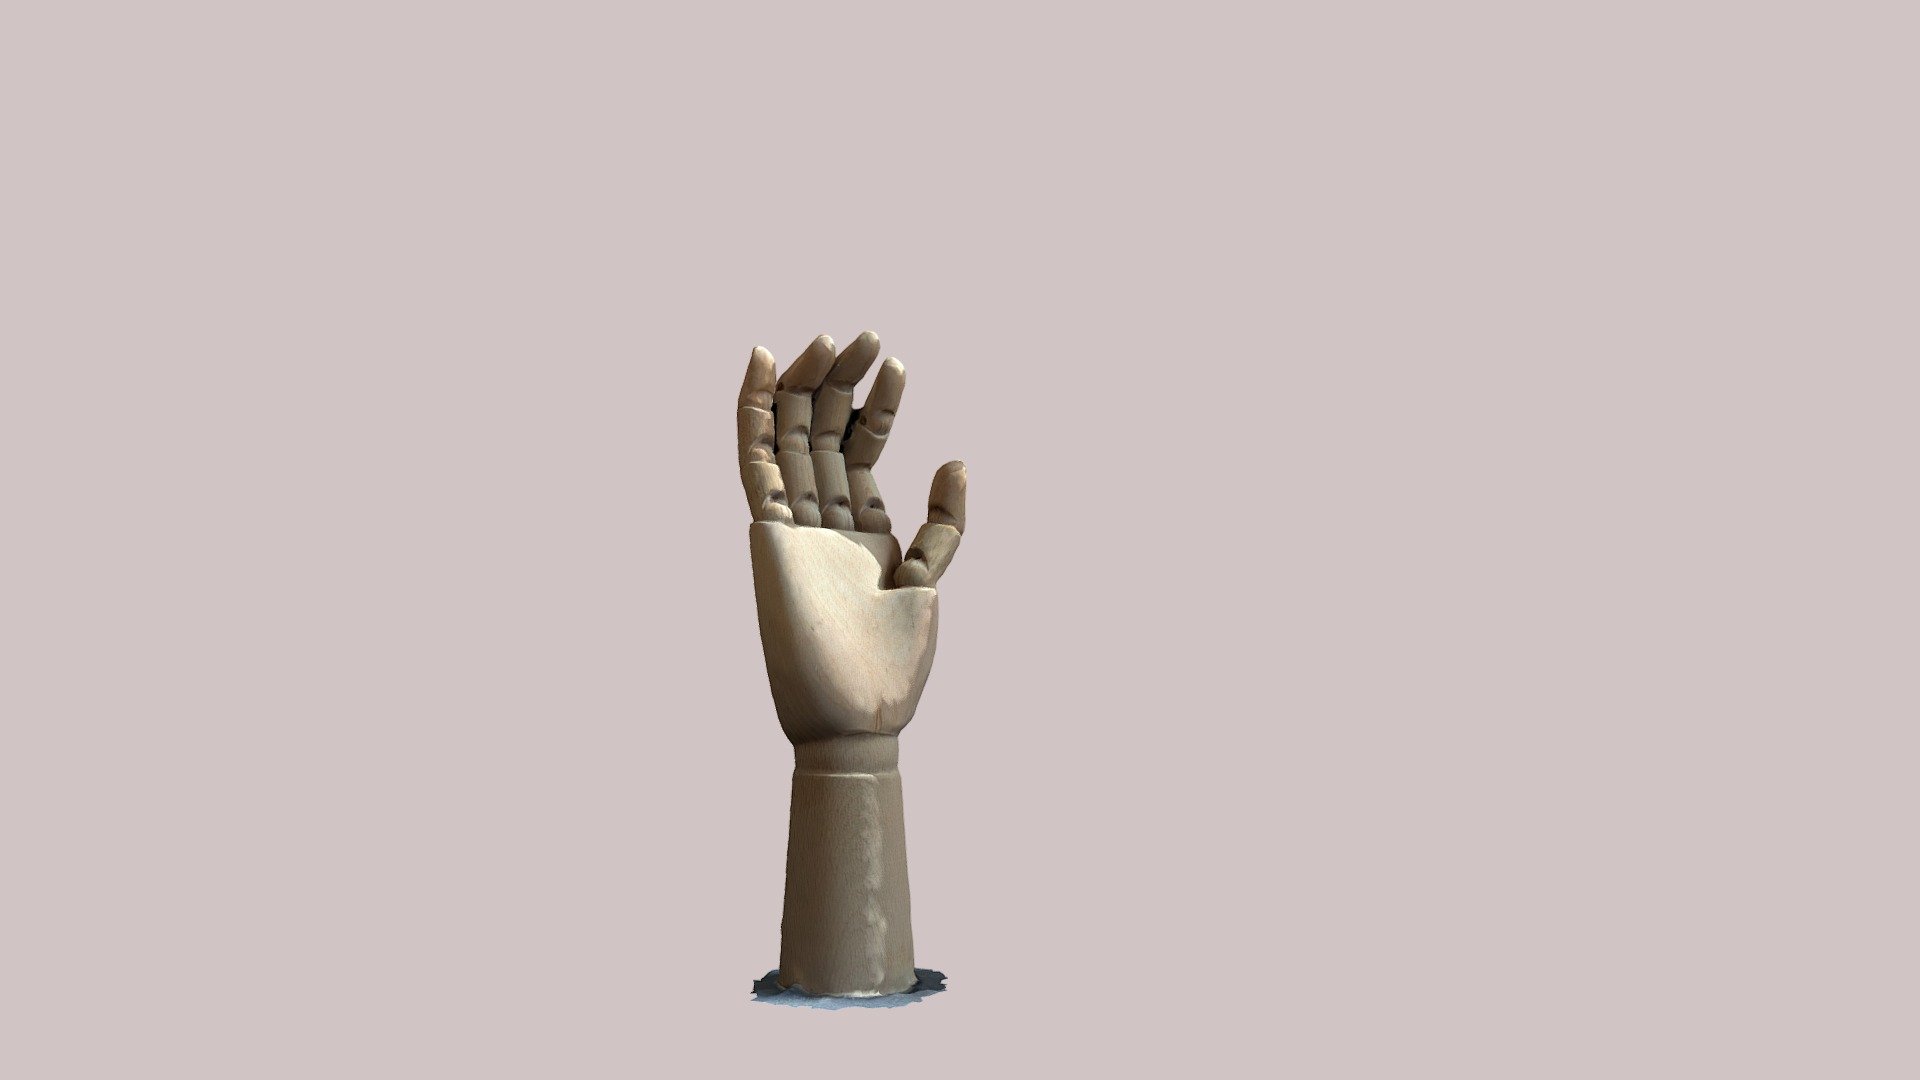 This is a photogrammetry scan of an articulated wooden hand 3d model